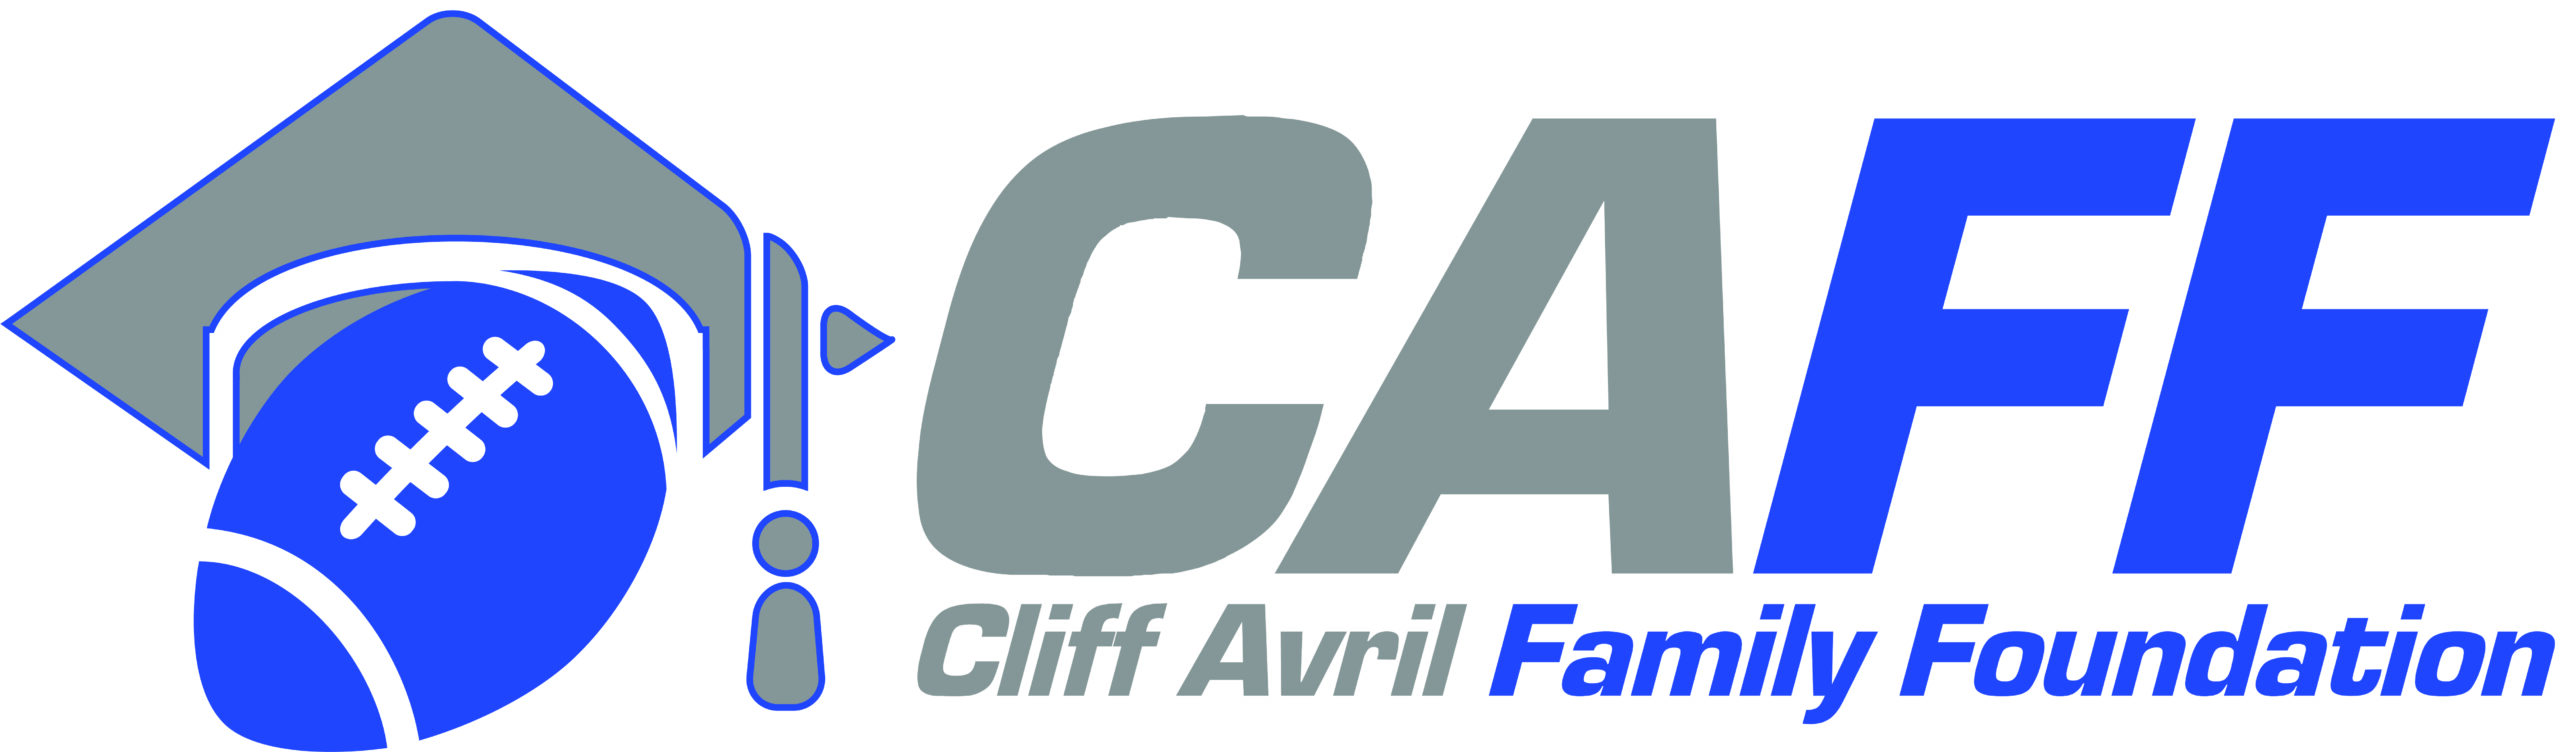 Cliff Avril Family Foundation